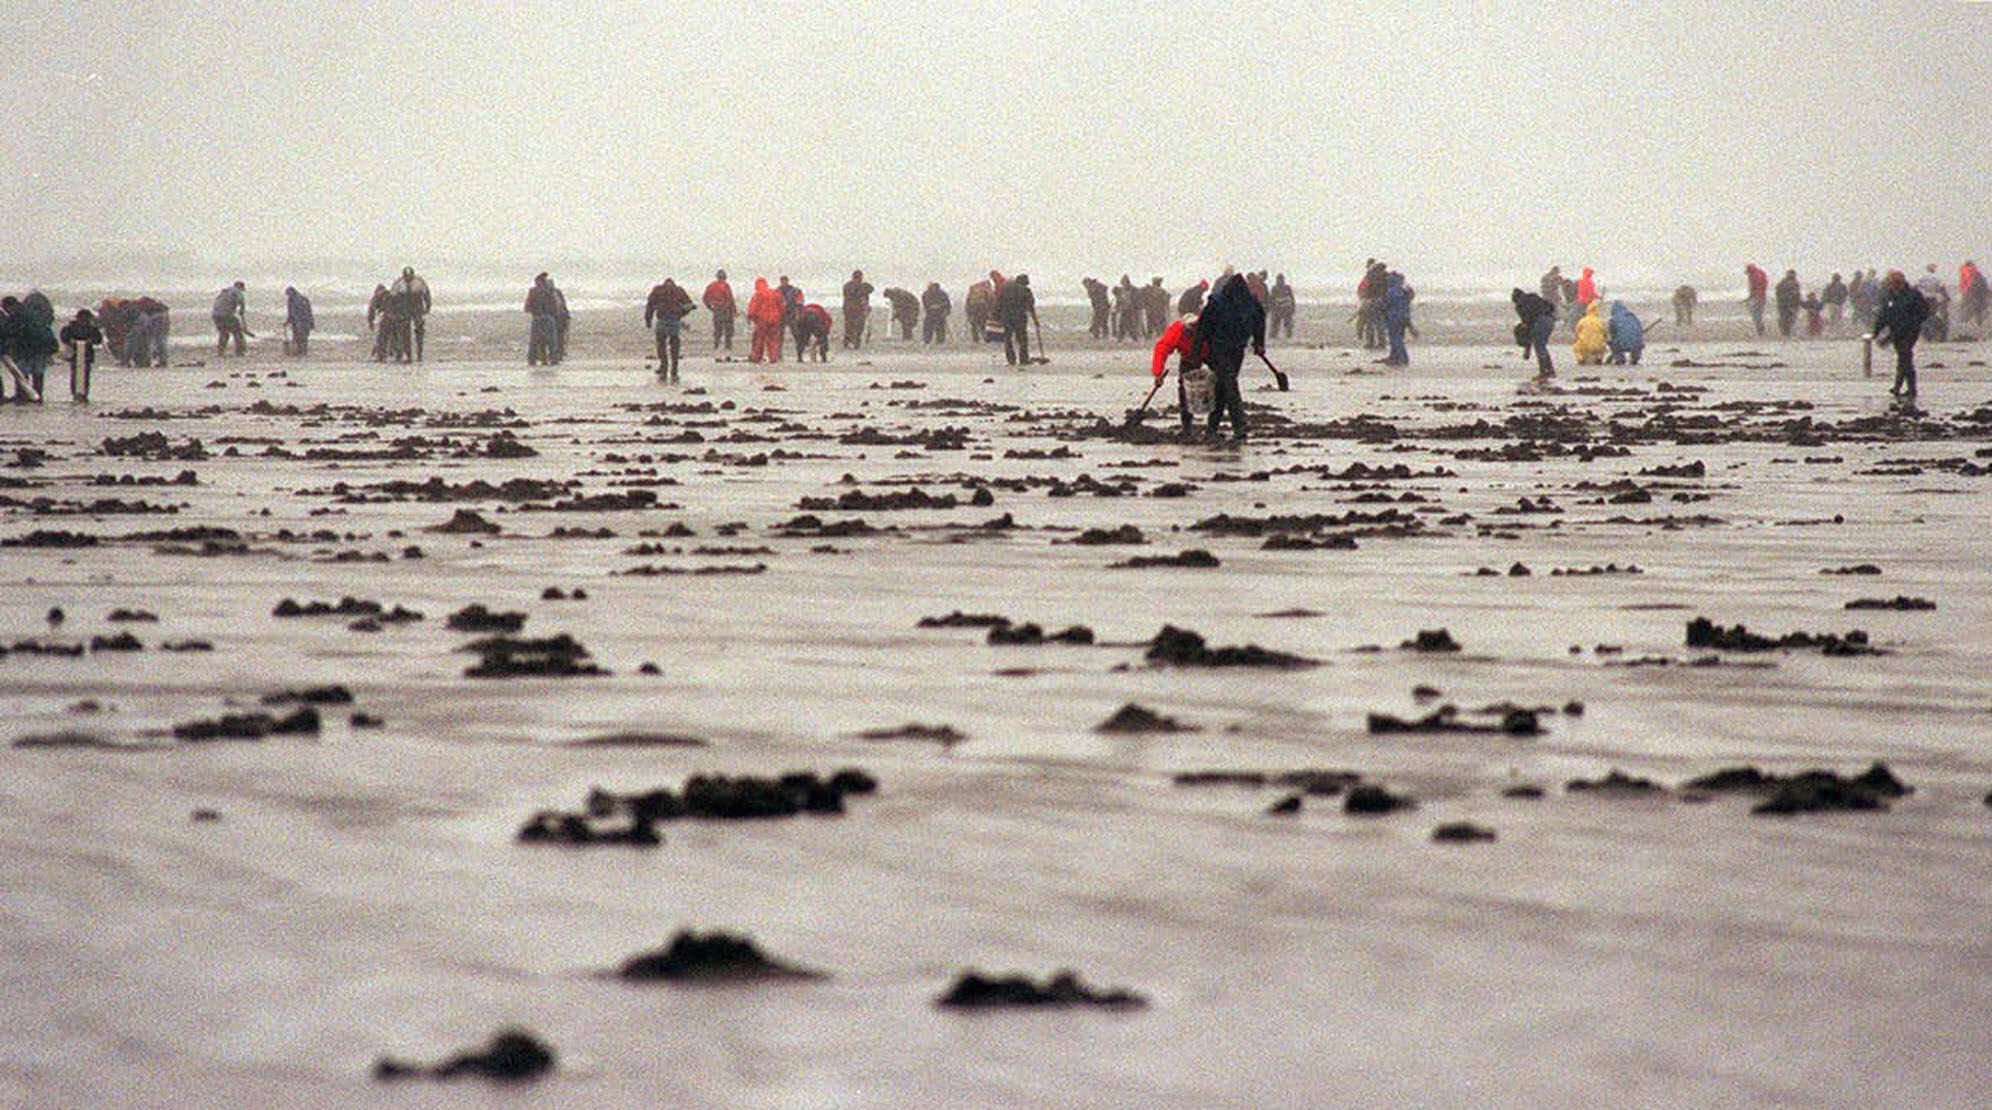 Razor clam digging switches to morning tides on March 30 this year.